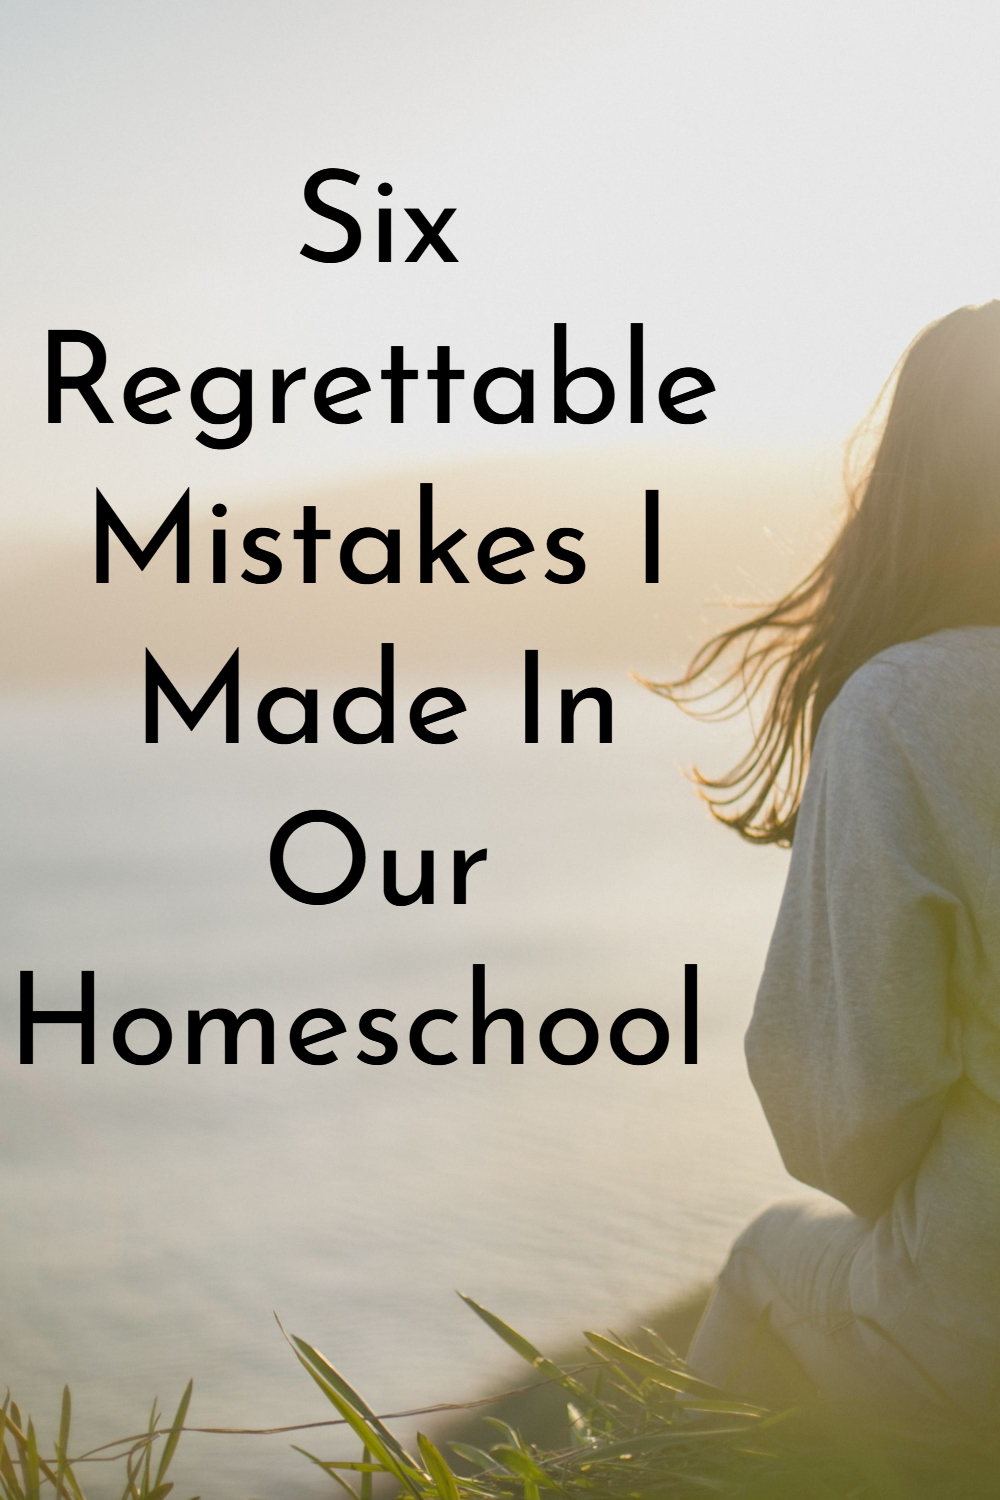 Six Regrettable Mistakes I Made In Our Homeschool